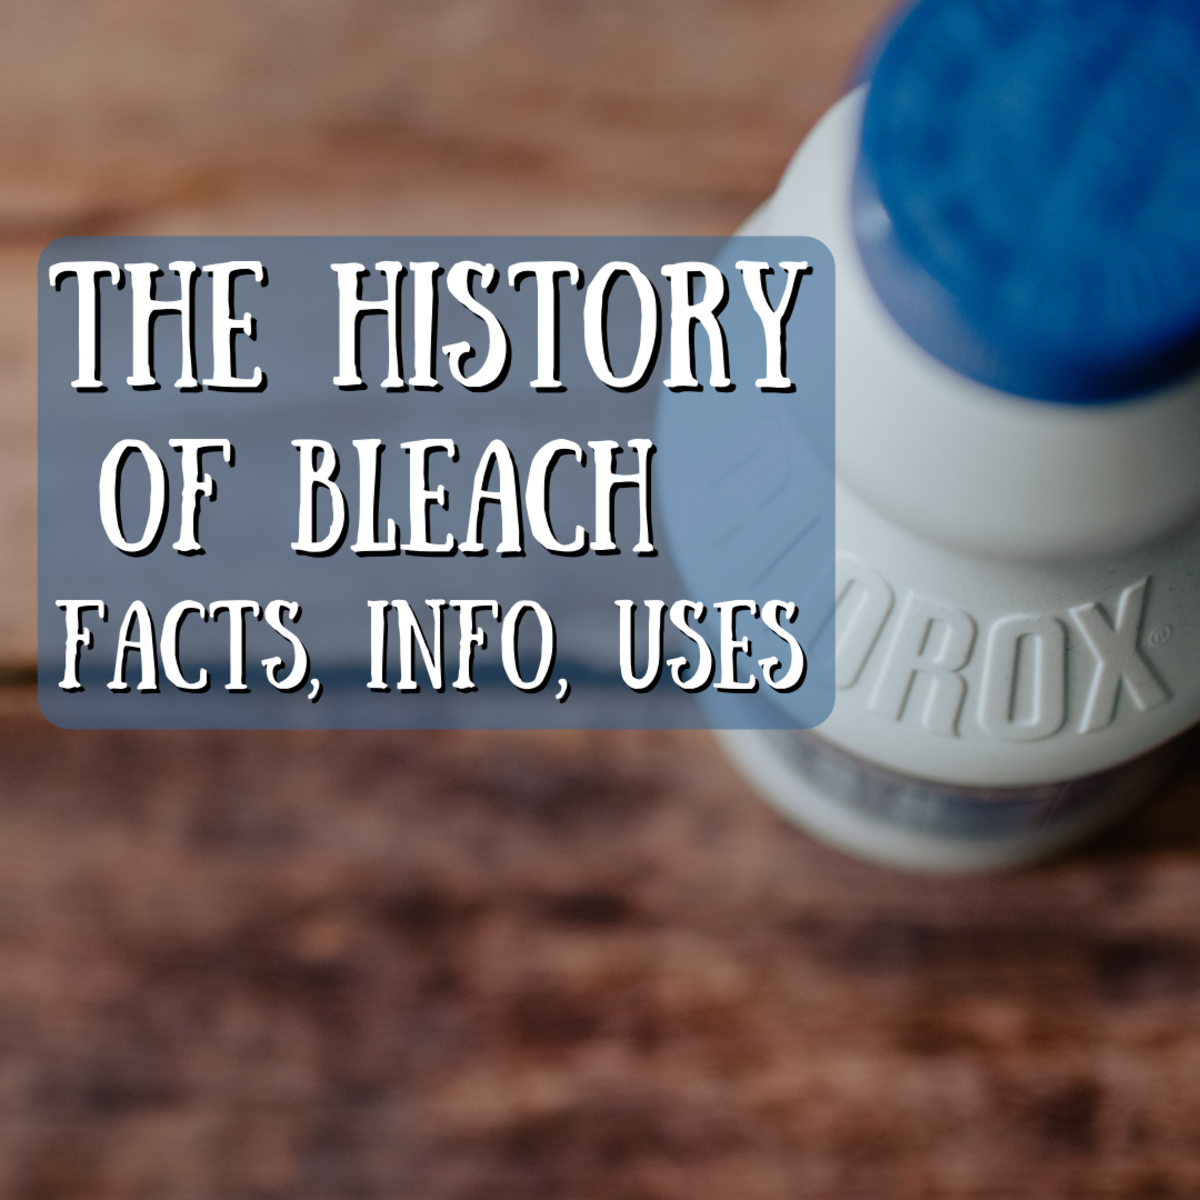 Read on to learn all about the history of bleach! When was bleach invented? How did bleach develop? Find out now!